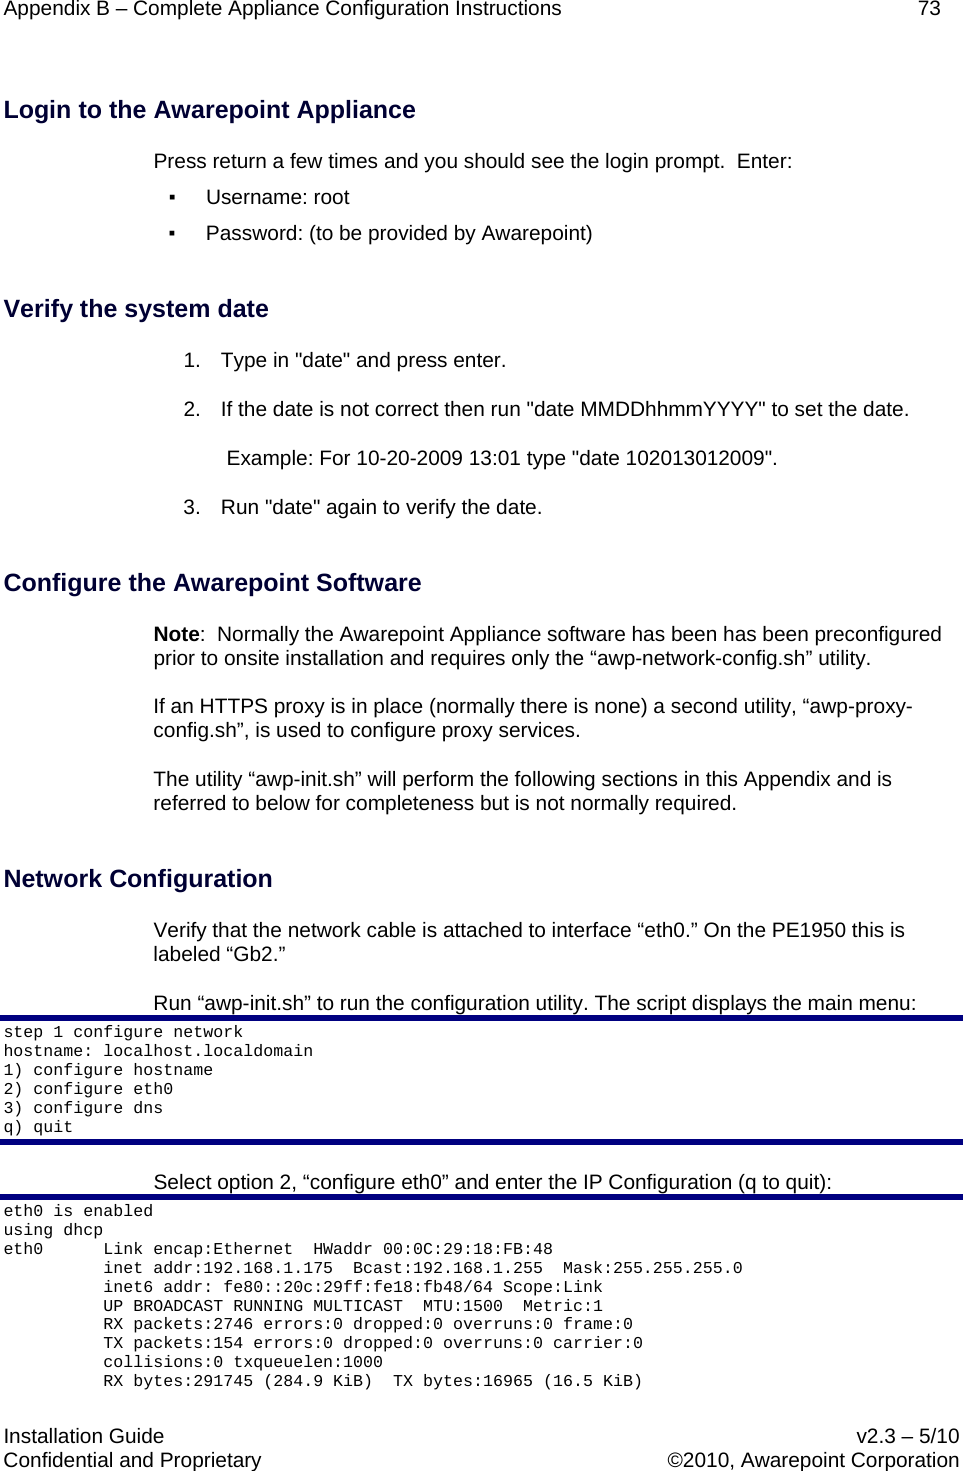 Appendix B – Complete Appliance Configuration Instructions    73  Installation Guide    v2.3 – 5/10 Confidential and Proprietary    ©2010, Awarepoint Corporation   Login to the Awarepoint Appliance Press return a few times and you should see the login prompt.  Enter: ▪ Username: root ▪ Password: (to be provided by Awarepoint)  Verify the system date 1. Type in &quot;date&quot; and press enter. 2.  If the date is not correct then run &quot;date MMDDhhmmYYYY&quot; to set the date.  Example: For 10-20-2009 13:01 type &quot;date 102013012009&quot;. 3. Run &quot;date&quot; again to verify the date.  Configure the Awarepoint Software Note:  Normally the Awarepoint Appliance software has been has been preconfigured prior to onsite installation and requires only the “awp-network-config.sh” utility.   If an HTTPS proxy is in place (normally there is none) a second utility, “awp-proxy-config.sh”, is used to configure proxy services. The utility “awp-init.sh” will perform the following sections in this Appendix and is referred to below for completeness but is not normally required.        Network Configuration  Verify that the network cable is attached to interface “eth0.” On the PE1950 this is labeled “Gb2.” Run “awp-init.sh” to run the configuration utility. The script displays the main menu: step 1 configure network hostname: localhost.localdomain 1) configure hostname 2) configure eth0 3) configure dns q) quit Select option 2, “configure eth0” and enter the IP Configuration (q to quit): eth0 is enabled using dhcp eth0      Link encap:Ethernet  HWaddr 00:0C:29:18:FB:48             inet addr:192.168.1.175  Bcast:192.168.1.255  Mask:255.255.255.0           inet6 addr: fe80::20c:29ff:fe18:fb48/64 Scope:Link           UP BROADCAST RUNNING MULTICAST  MTU:1500  Metric:1           RX packets:2746 errors:0 dropped:0 overruns:0 frame:0           TX packets:154 errors:0 dropped:0 overruns:0 carrier:0           collisions:0 txqueuelen:1000            RX bytes:291745 (284.9 KiB)  TX bytes:16965 (16.5 KiB) 